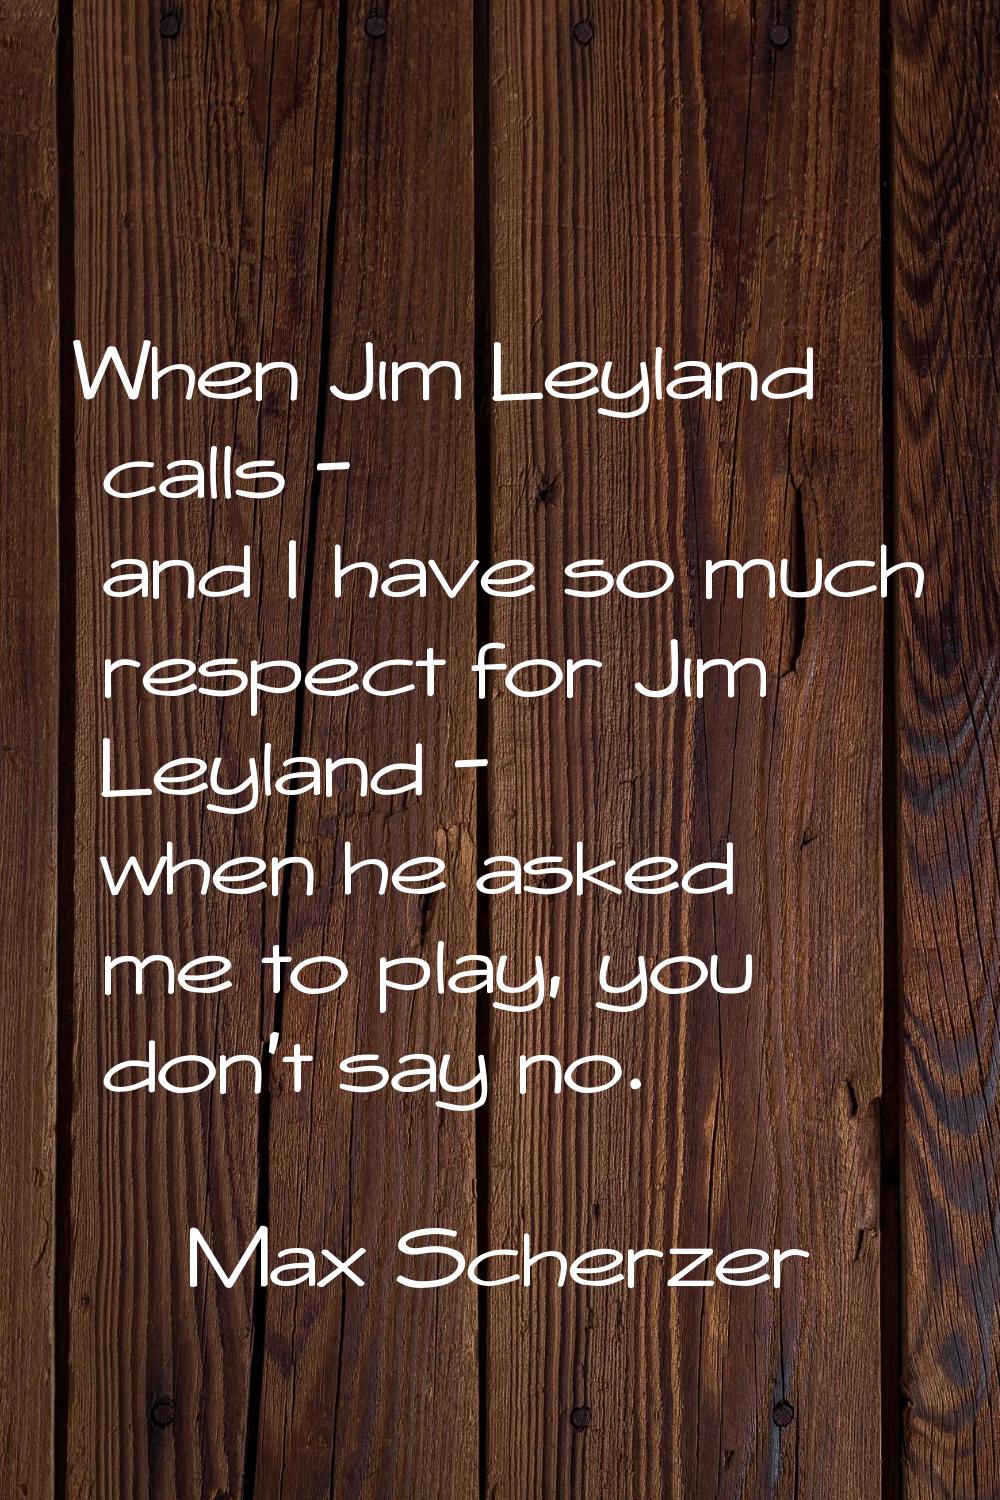 When Jim Leyland calls - and I have so much respect for Jim Leyland - when he asked me to play, you